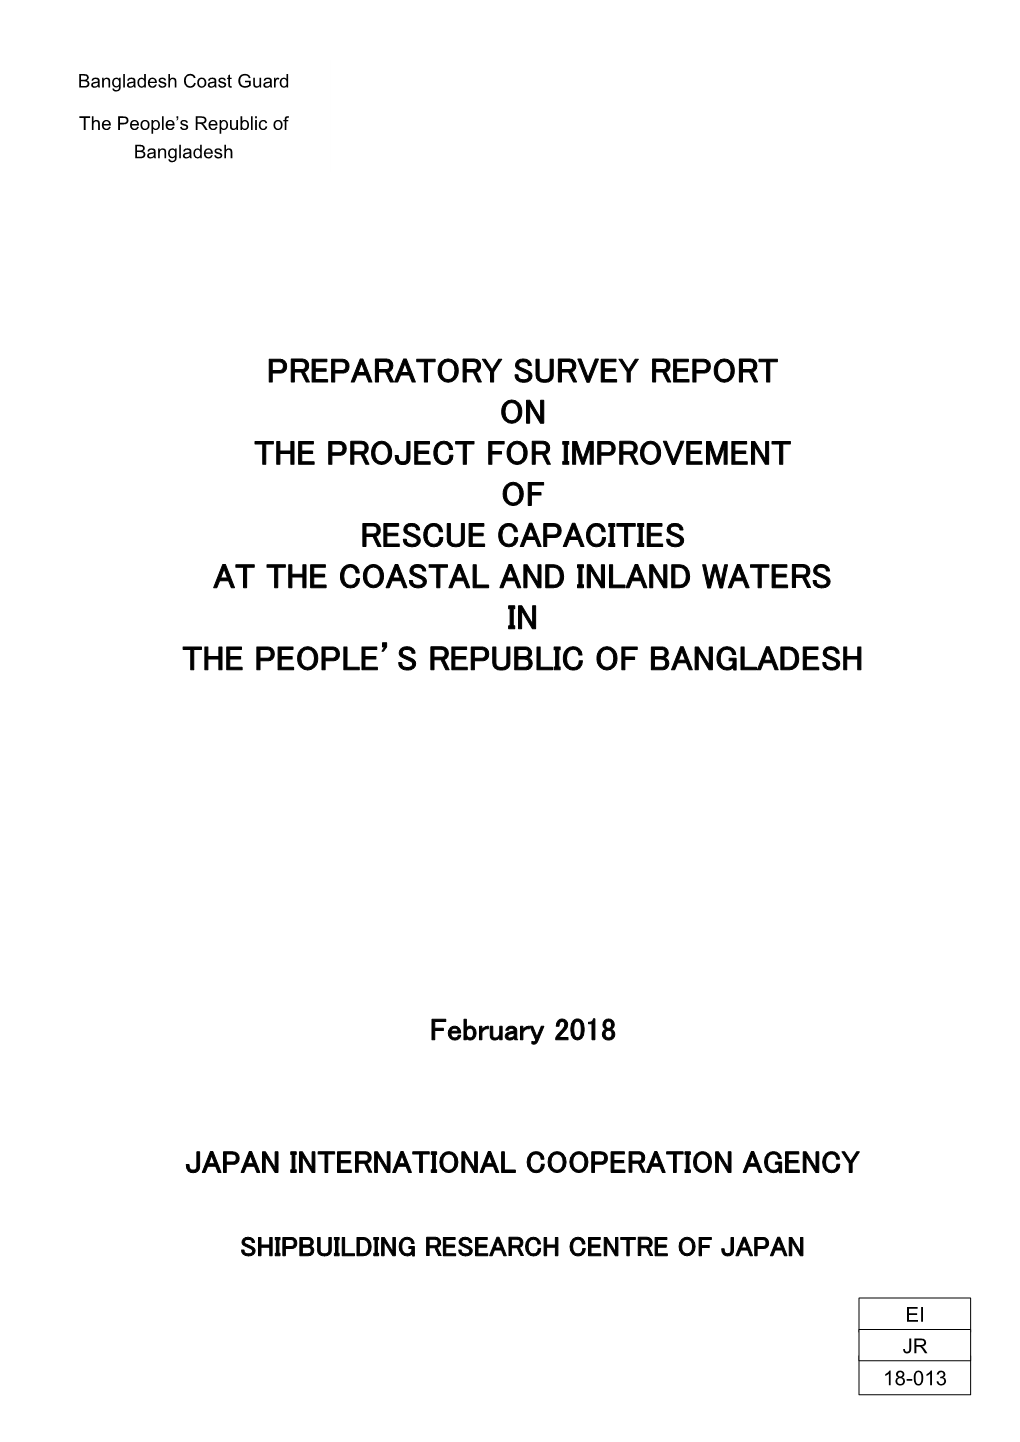 Preparatory Survey Report on the Project for Improvement of Rescue Capacities at the Coastal and Inland Waters in the People’S Republic of Bangladesh